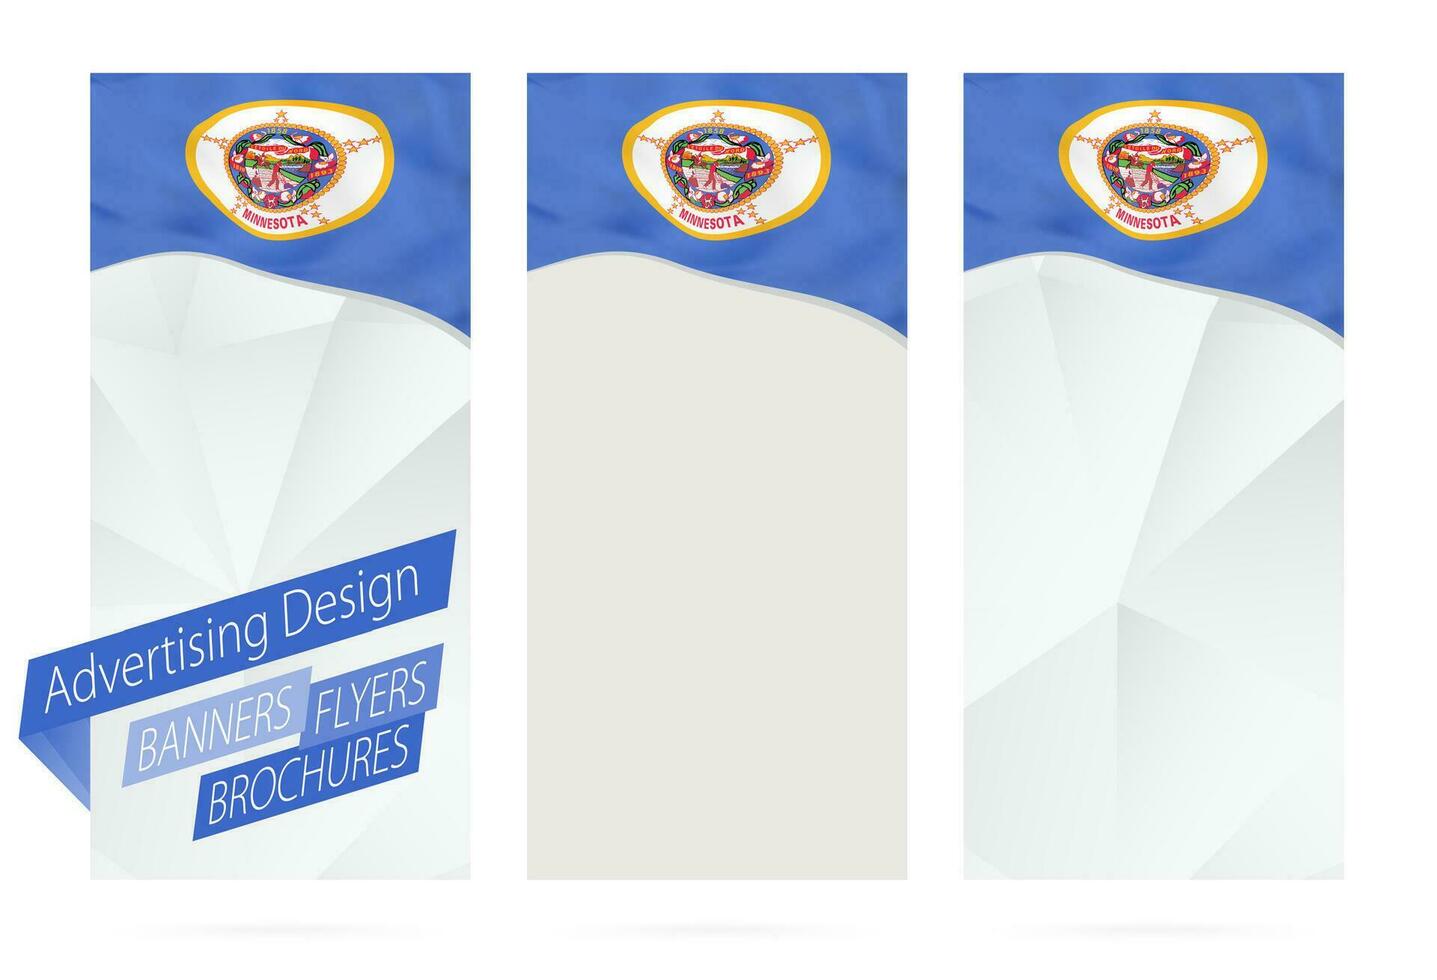 Design of banners, flyers, brochures with Minnesota State Flag. vector